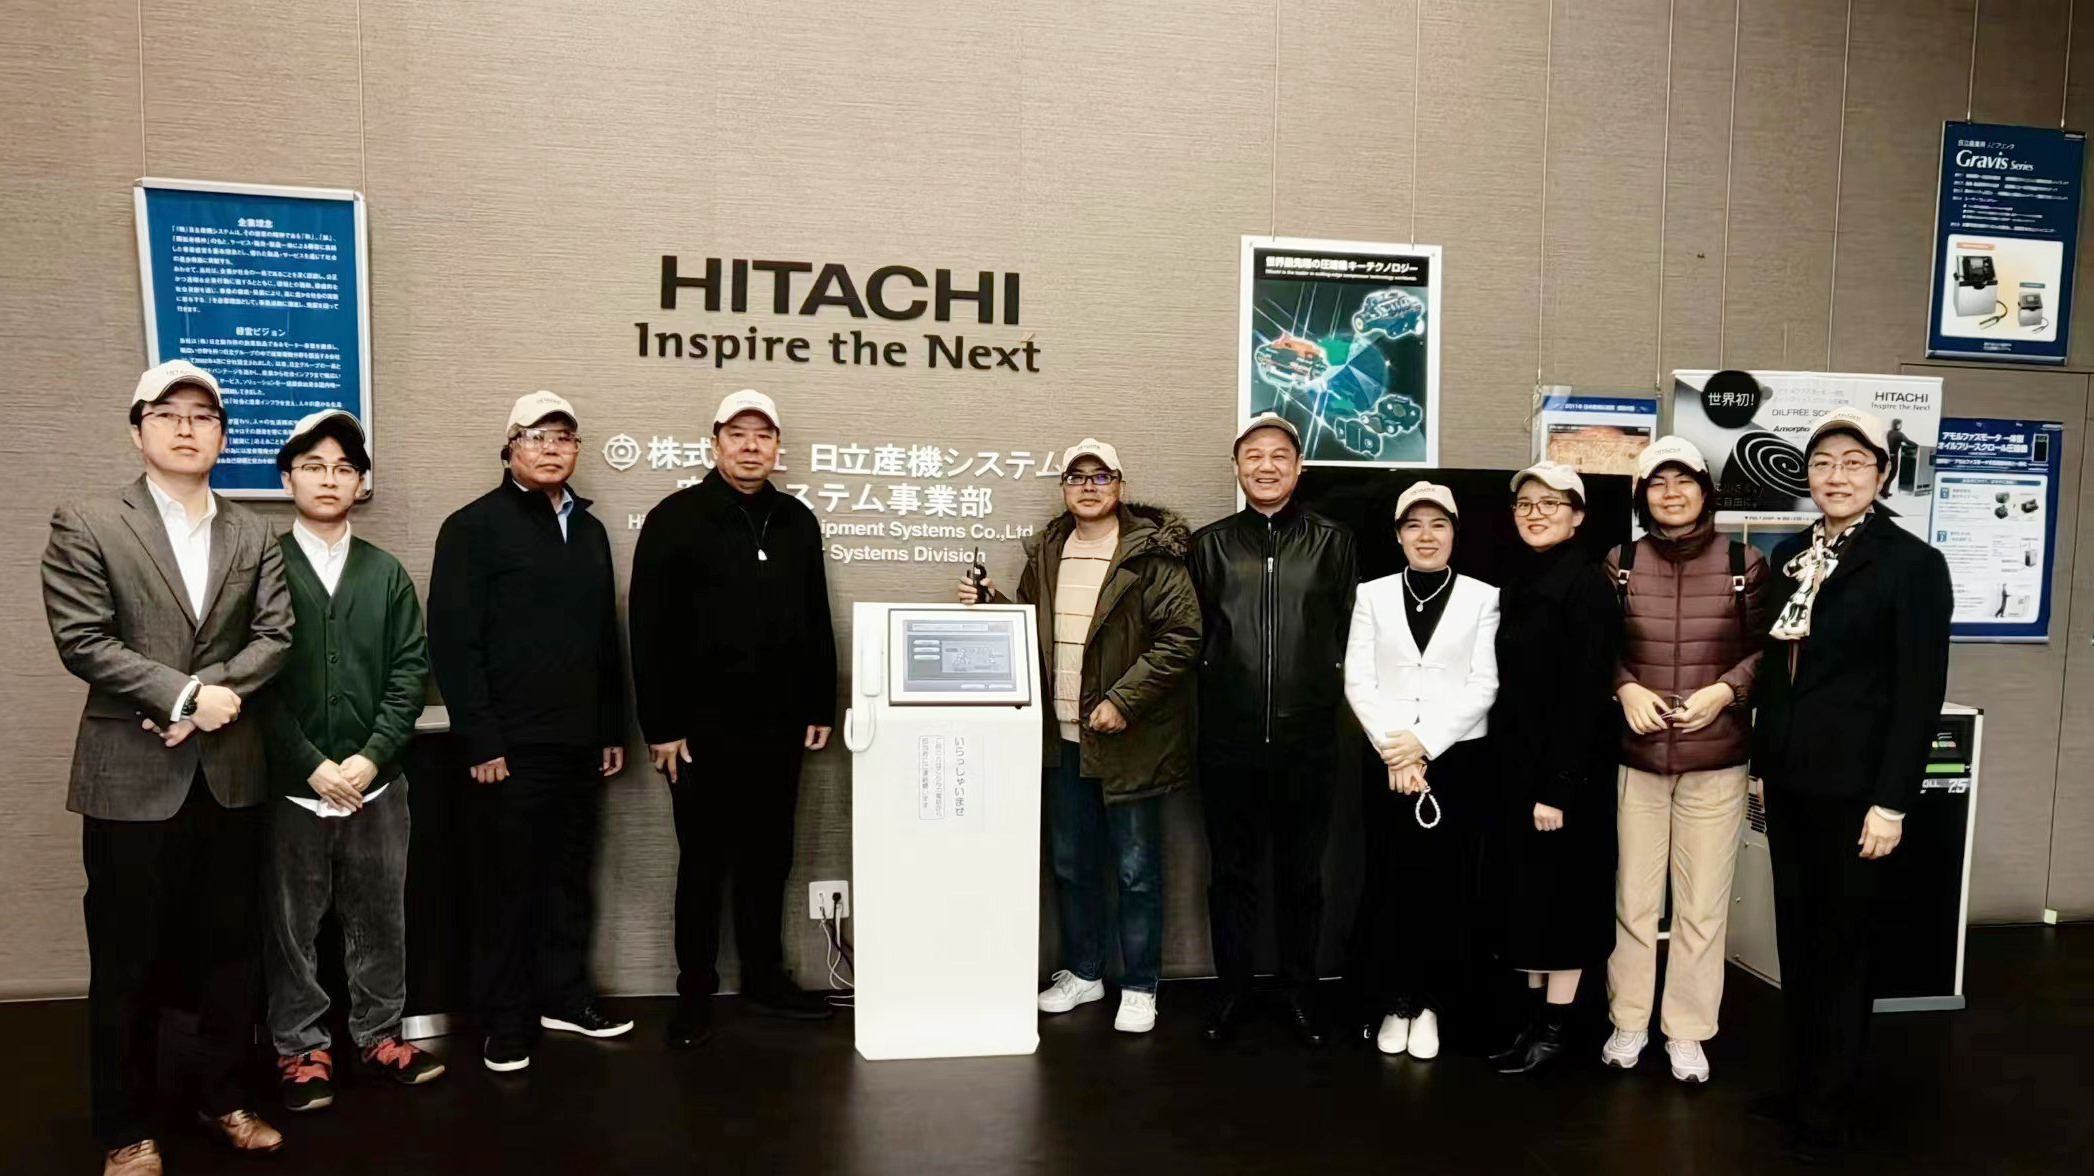 HGAP-SZ Outstanding Distributors Visit and Exchange at Hitachi Industrial Equipment Systems (HIES) Headquarters